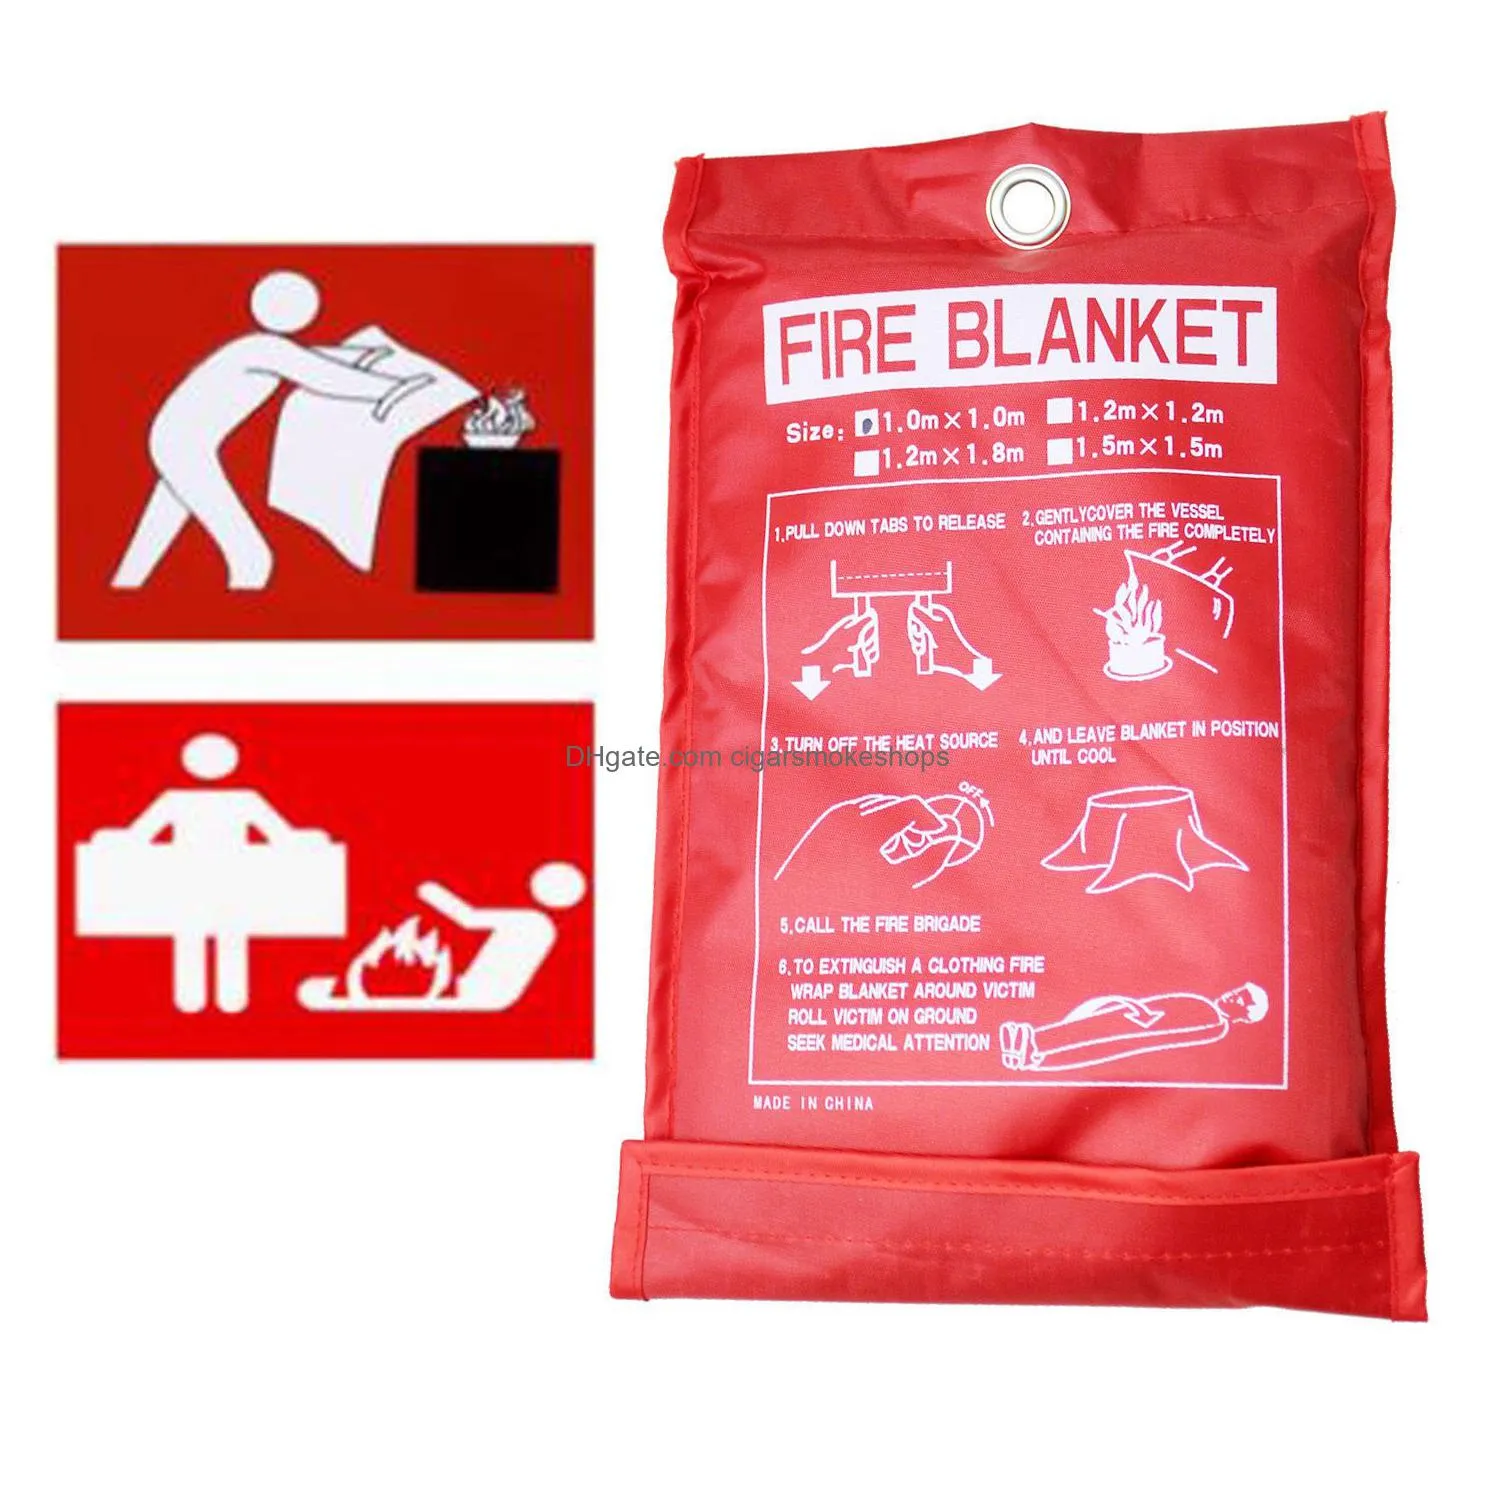 Other Home & Garden Home Safety Fire Blanket Large In Case Quick Release Protection Kitchen Cases 1M X Home Garden Dhmaq